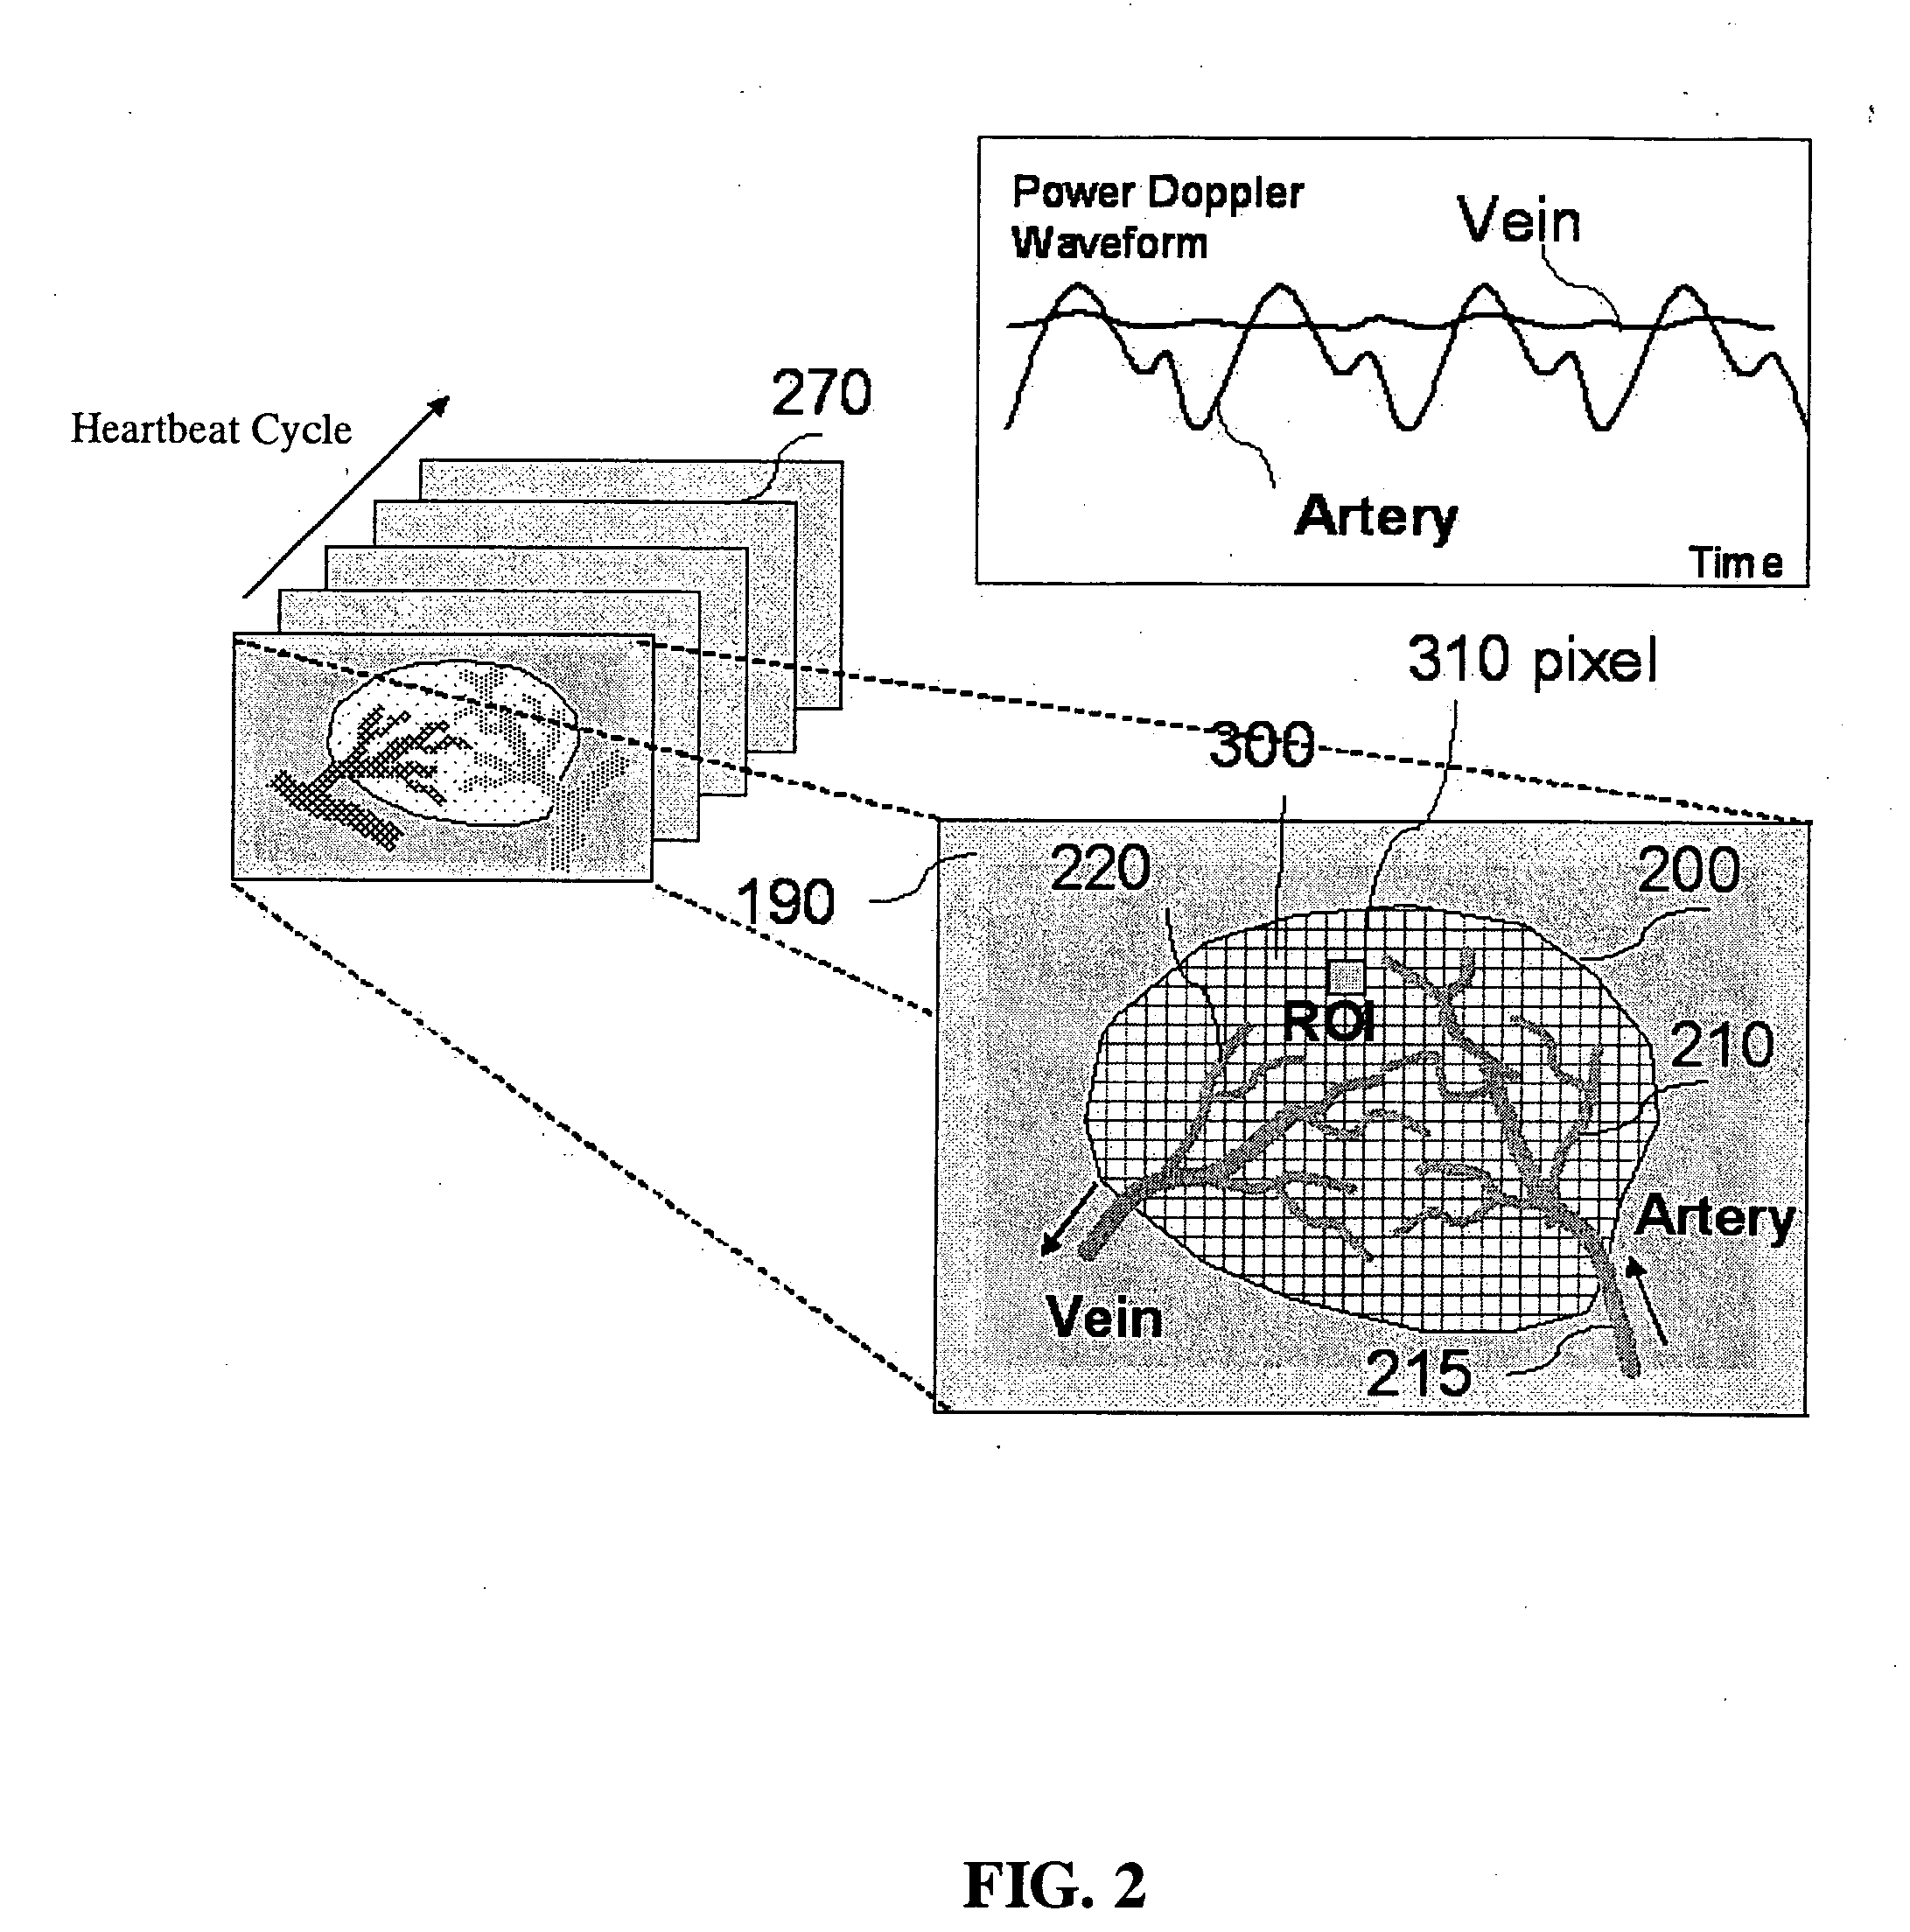 Quantitative non-invasive method for detecting degree of malignancy in tumors and application thereof